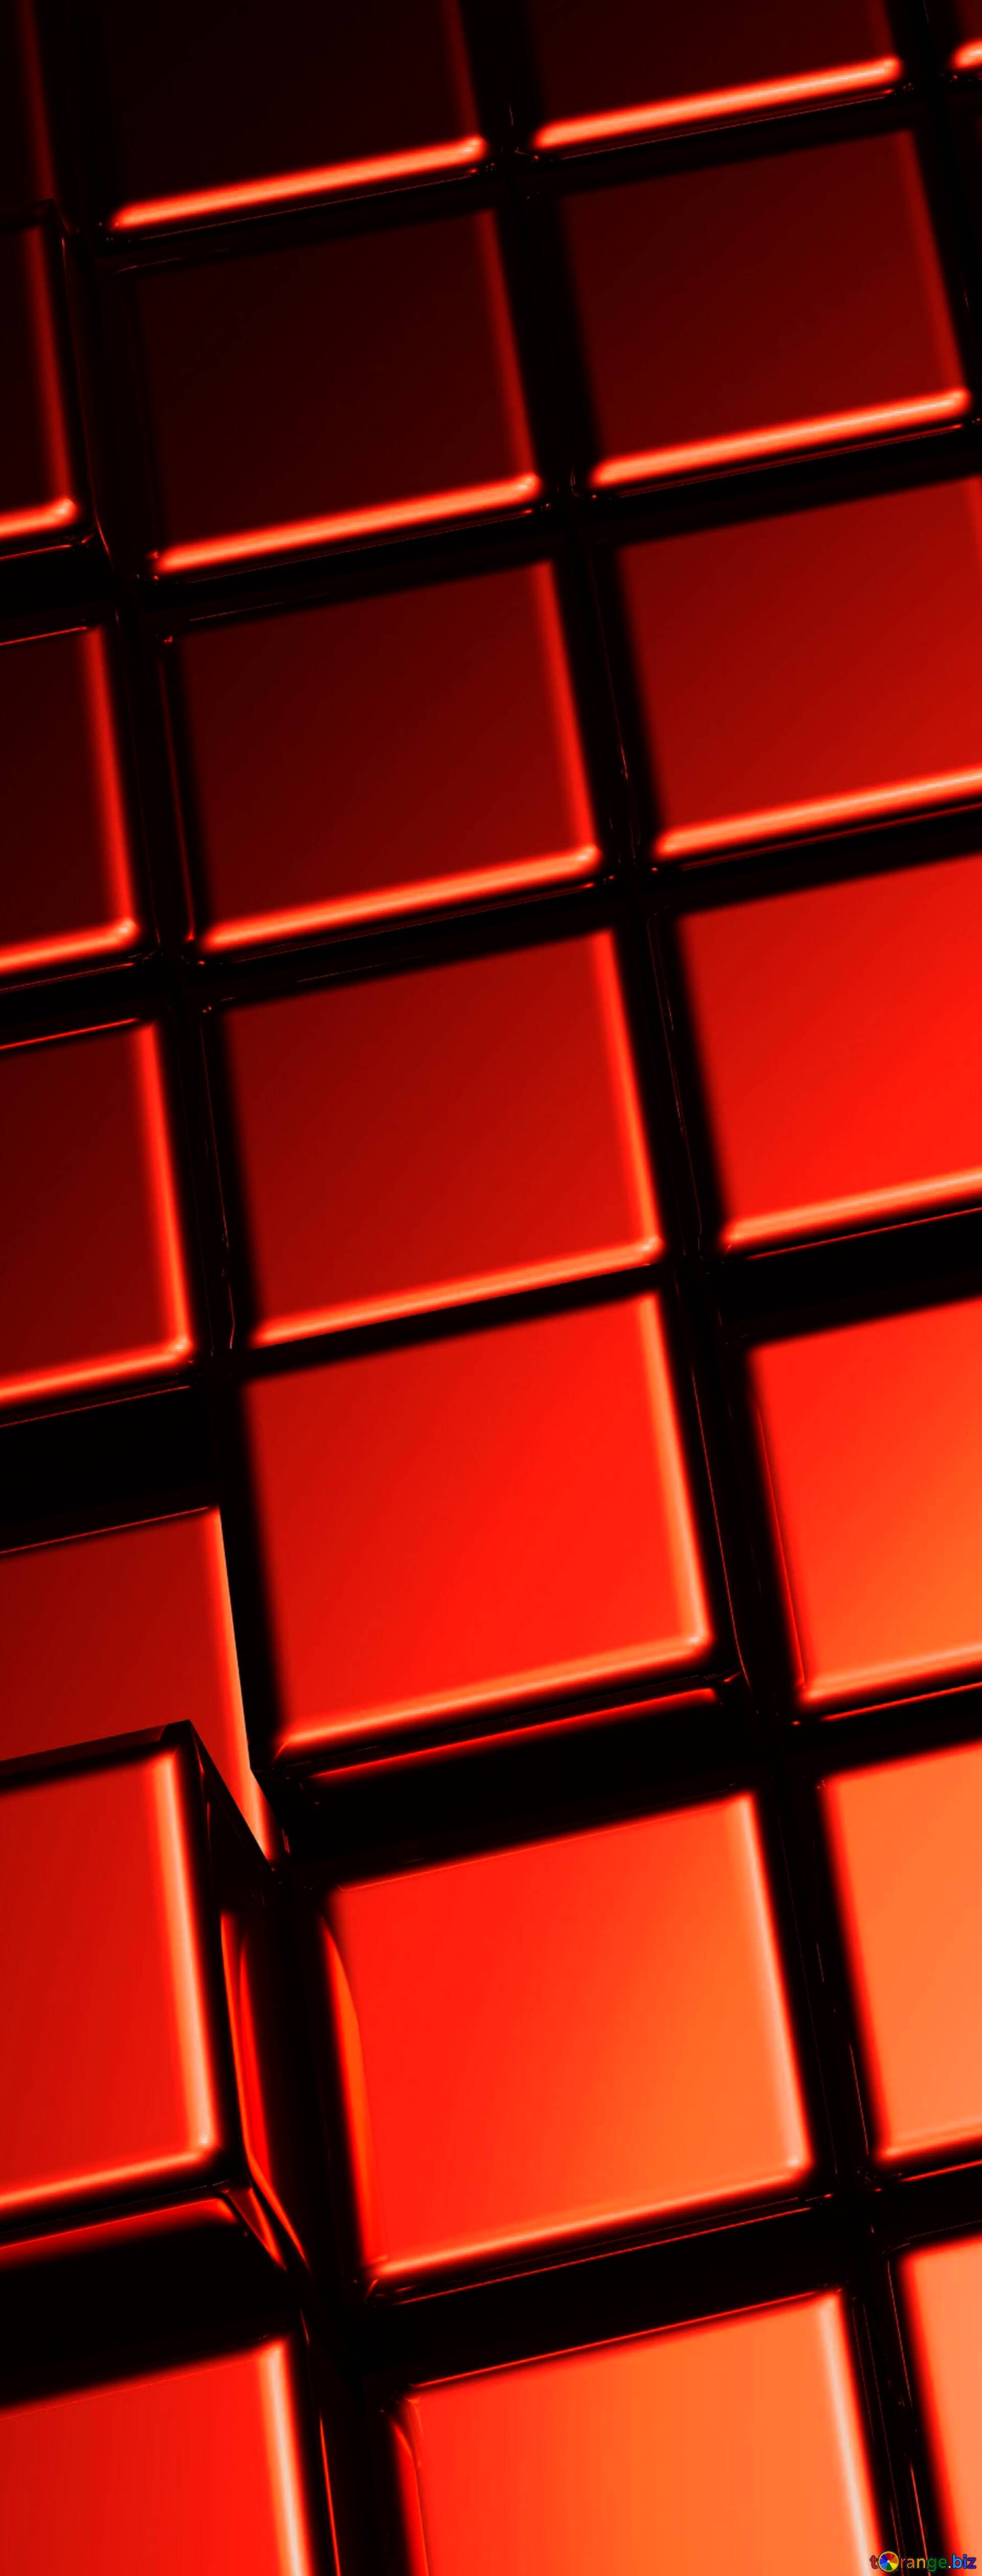 Download Free Picture 3d Abstract Red Metal Cube Boxes Vertical Banner Background On Cc By License Free Image Stock Torange Biz Fx